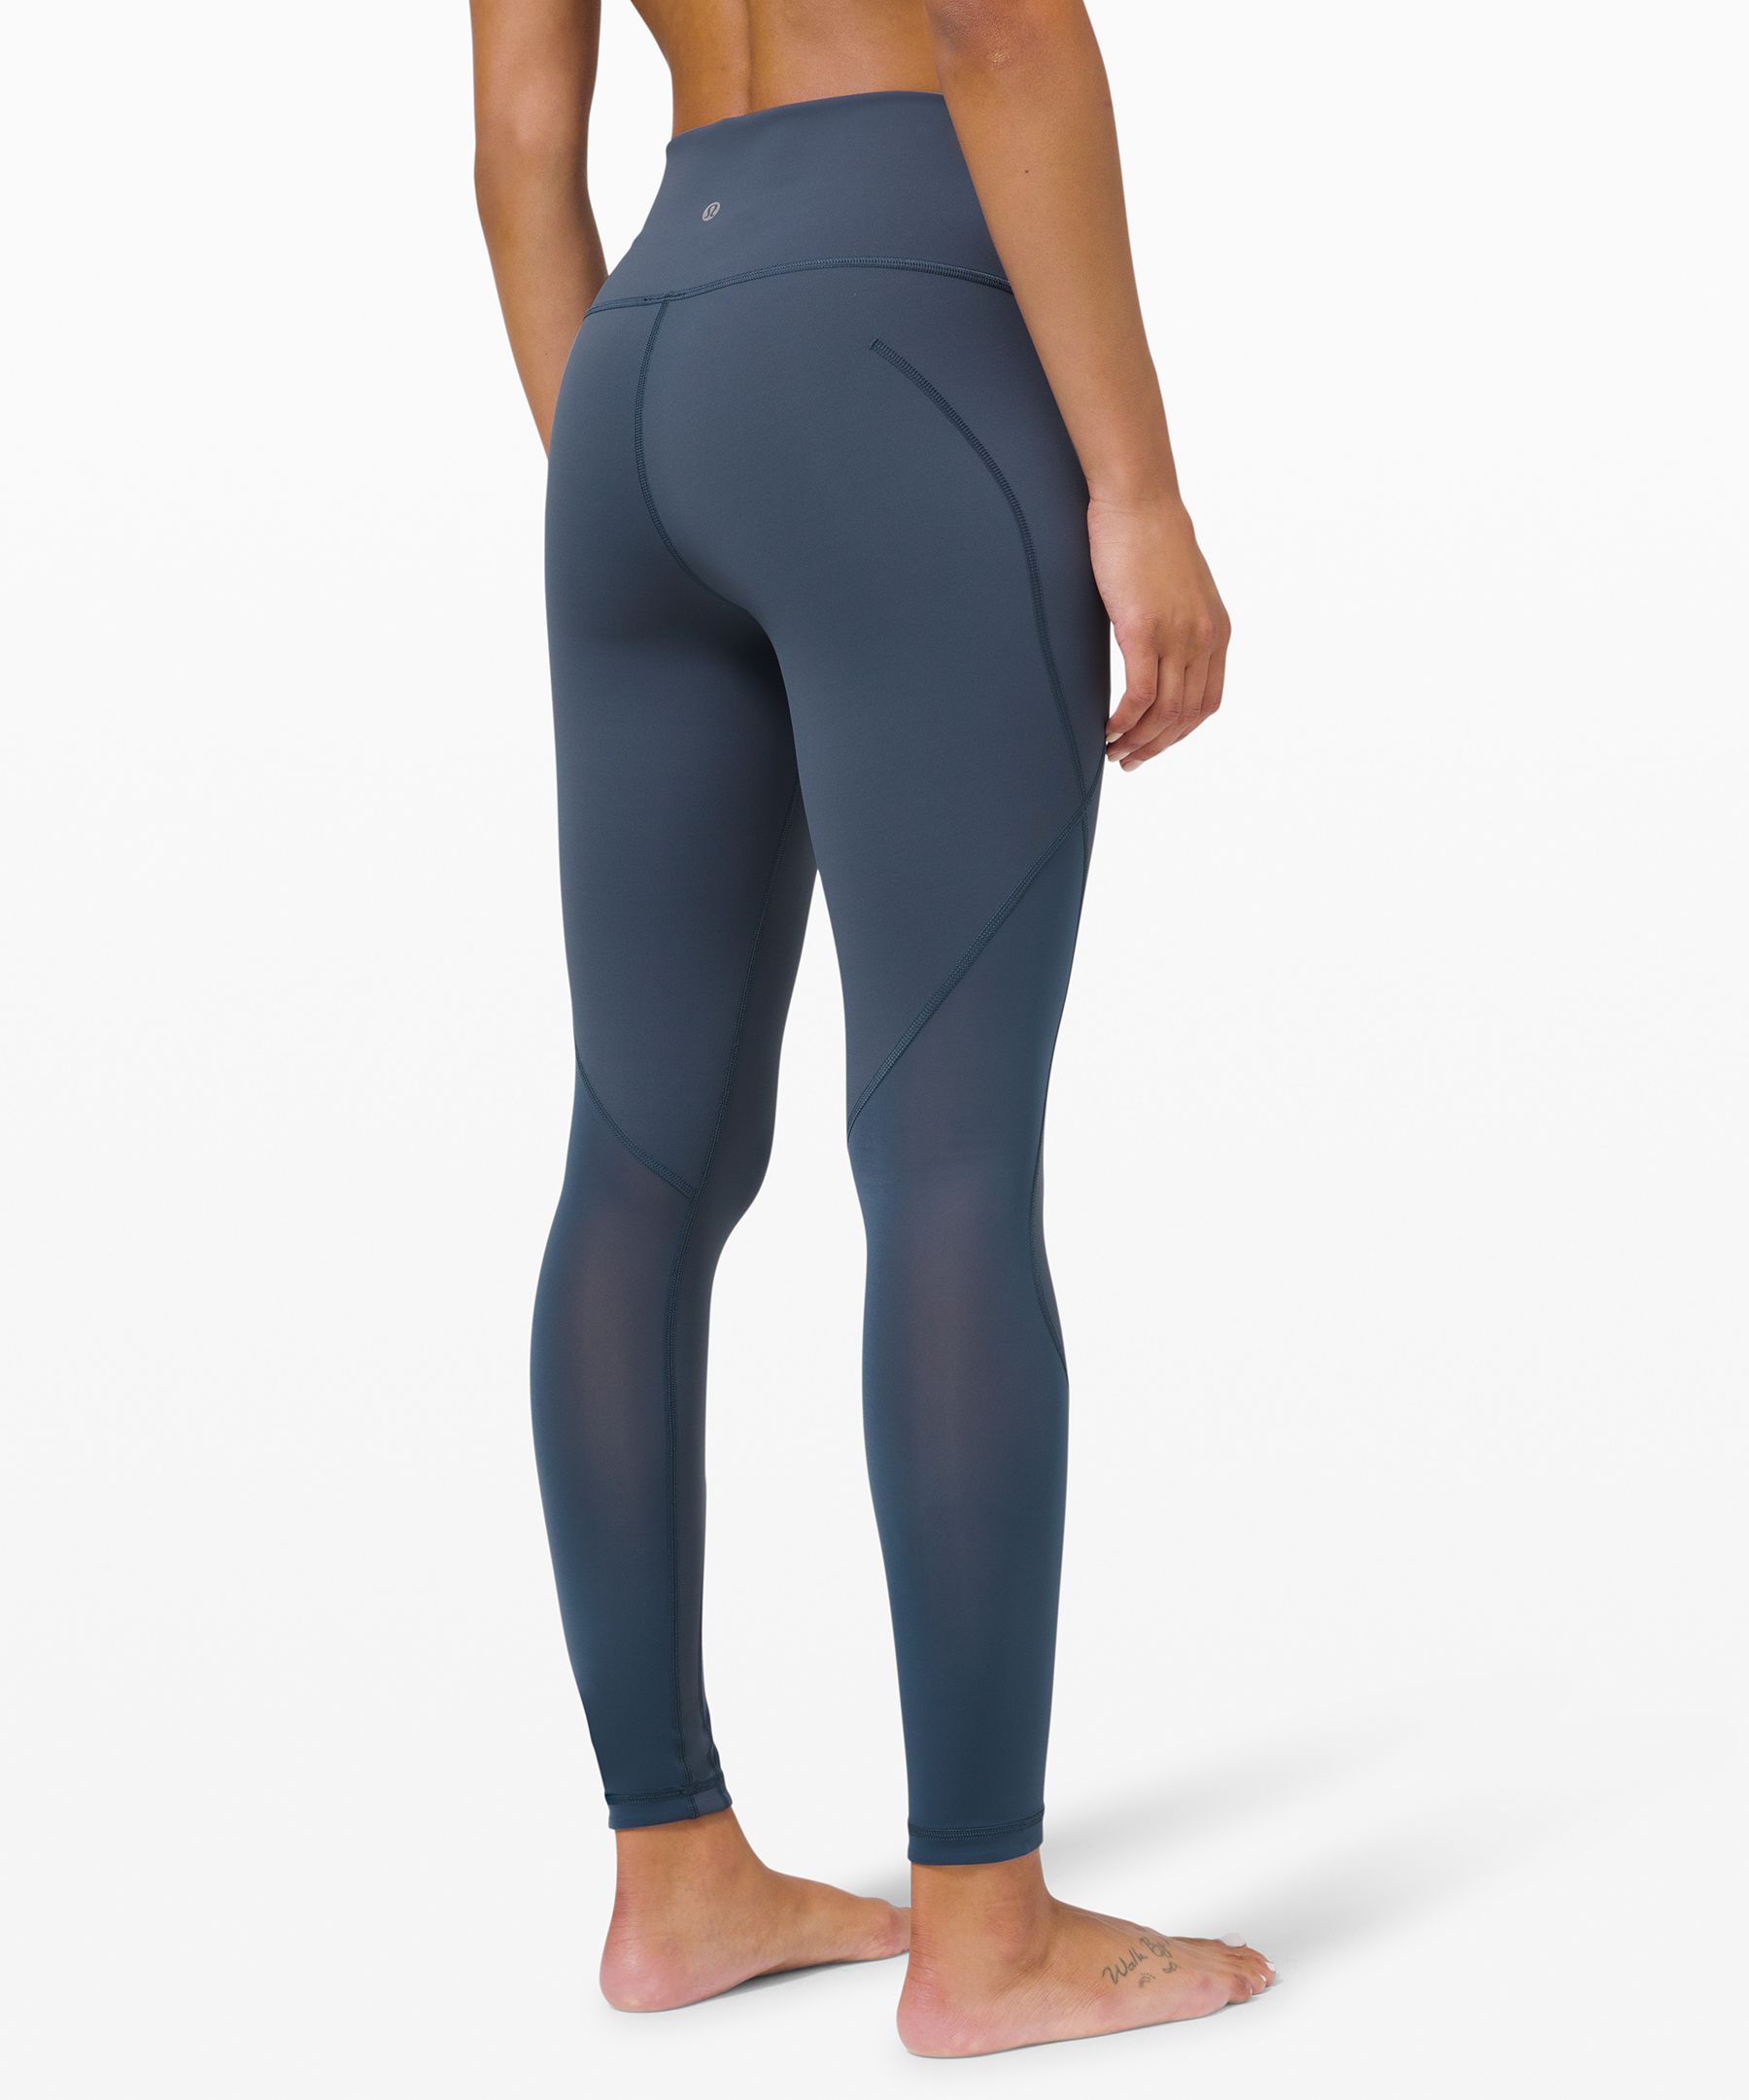 Lululemon High Waisted Leggings Sales Tax  International Society of  Precision Agriculture